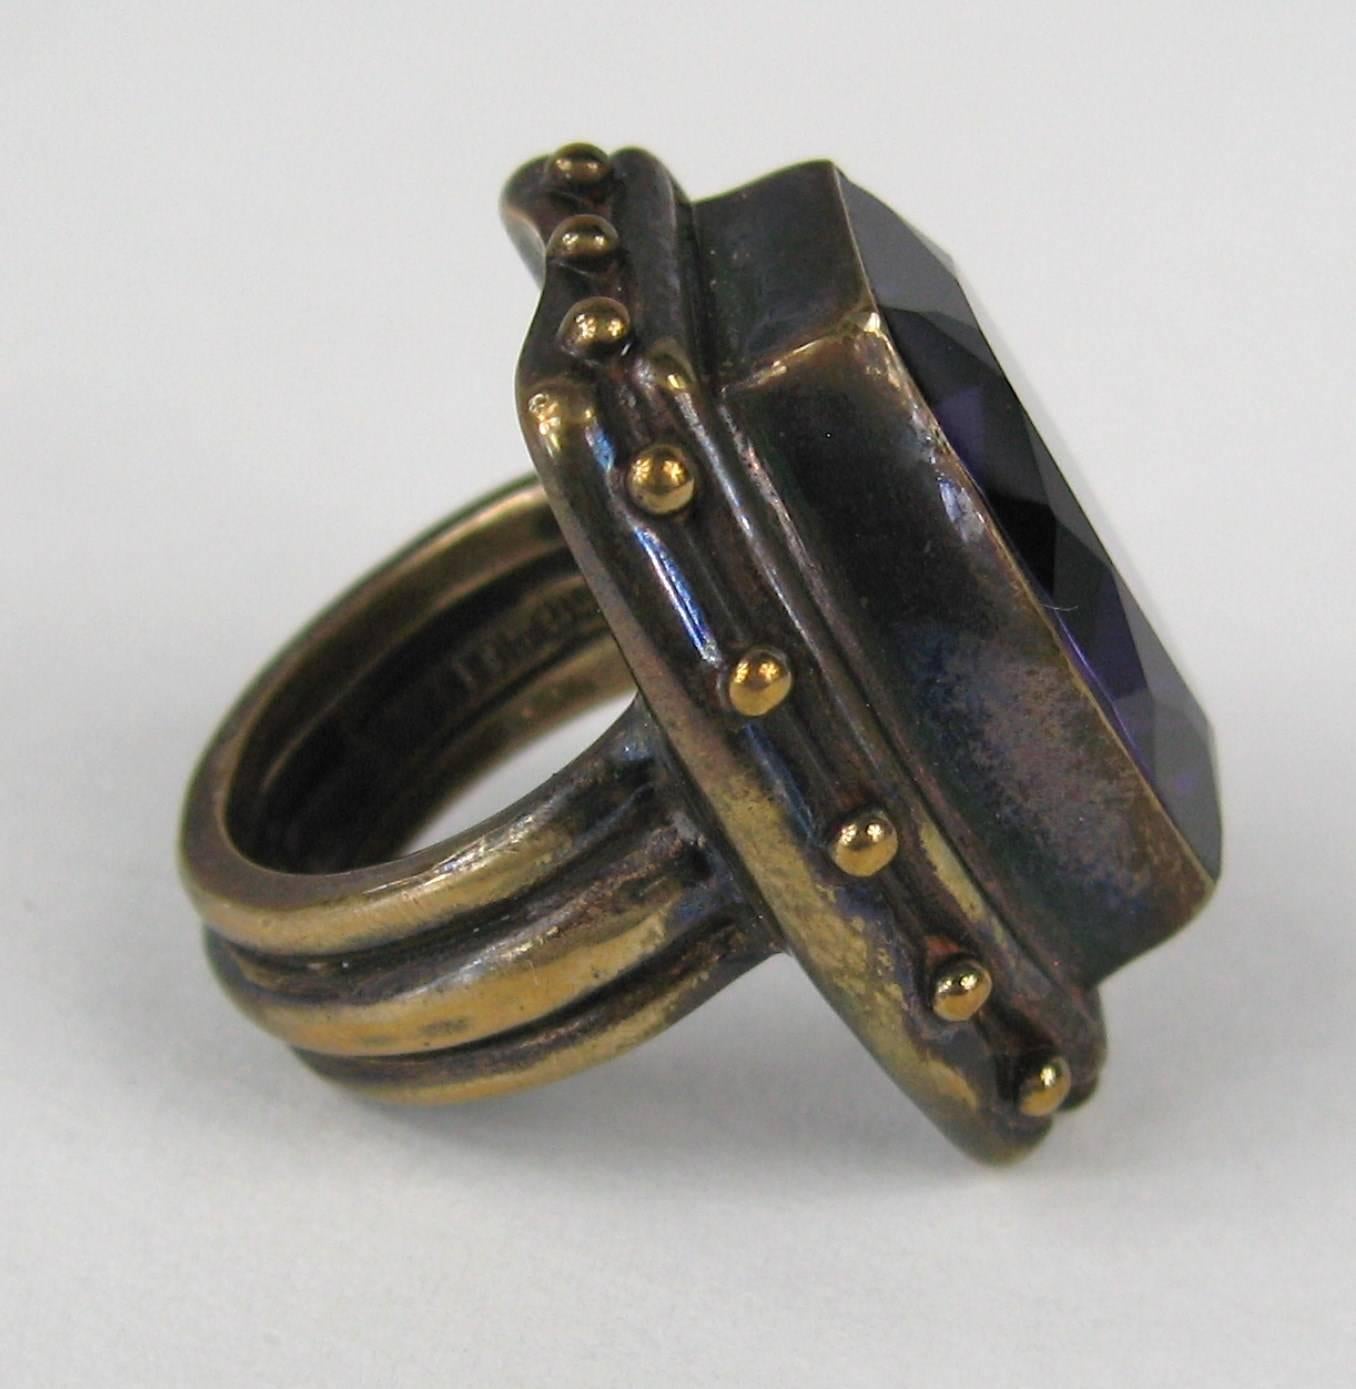 This is stunning, set in sterling silver with a bronze wash over it. Stephen Dweck creation from the 1990s Ring measures 1.13in. top to bottom x .93in. wide Size 6 New Old Stock, never worn. This is out of a massive collection of Designer Clothing